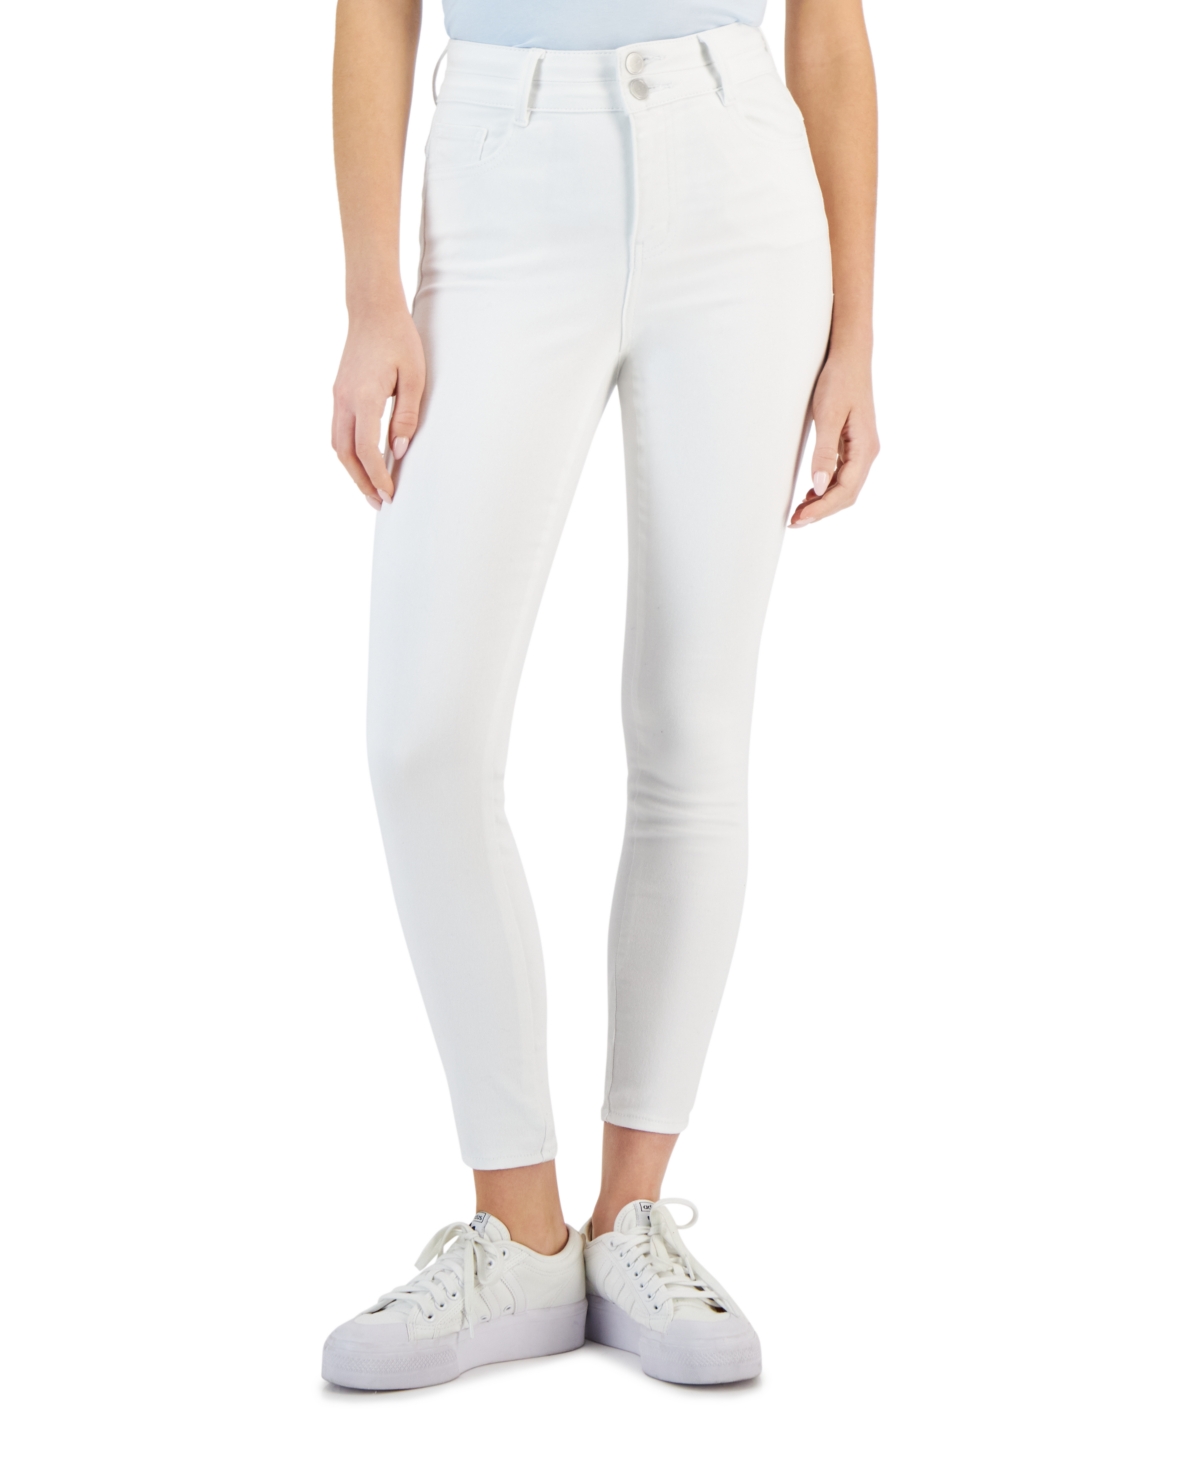 Juniors' Curvy High-Rise Skinny Ankle Jeans - White